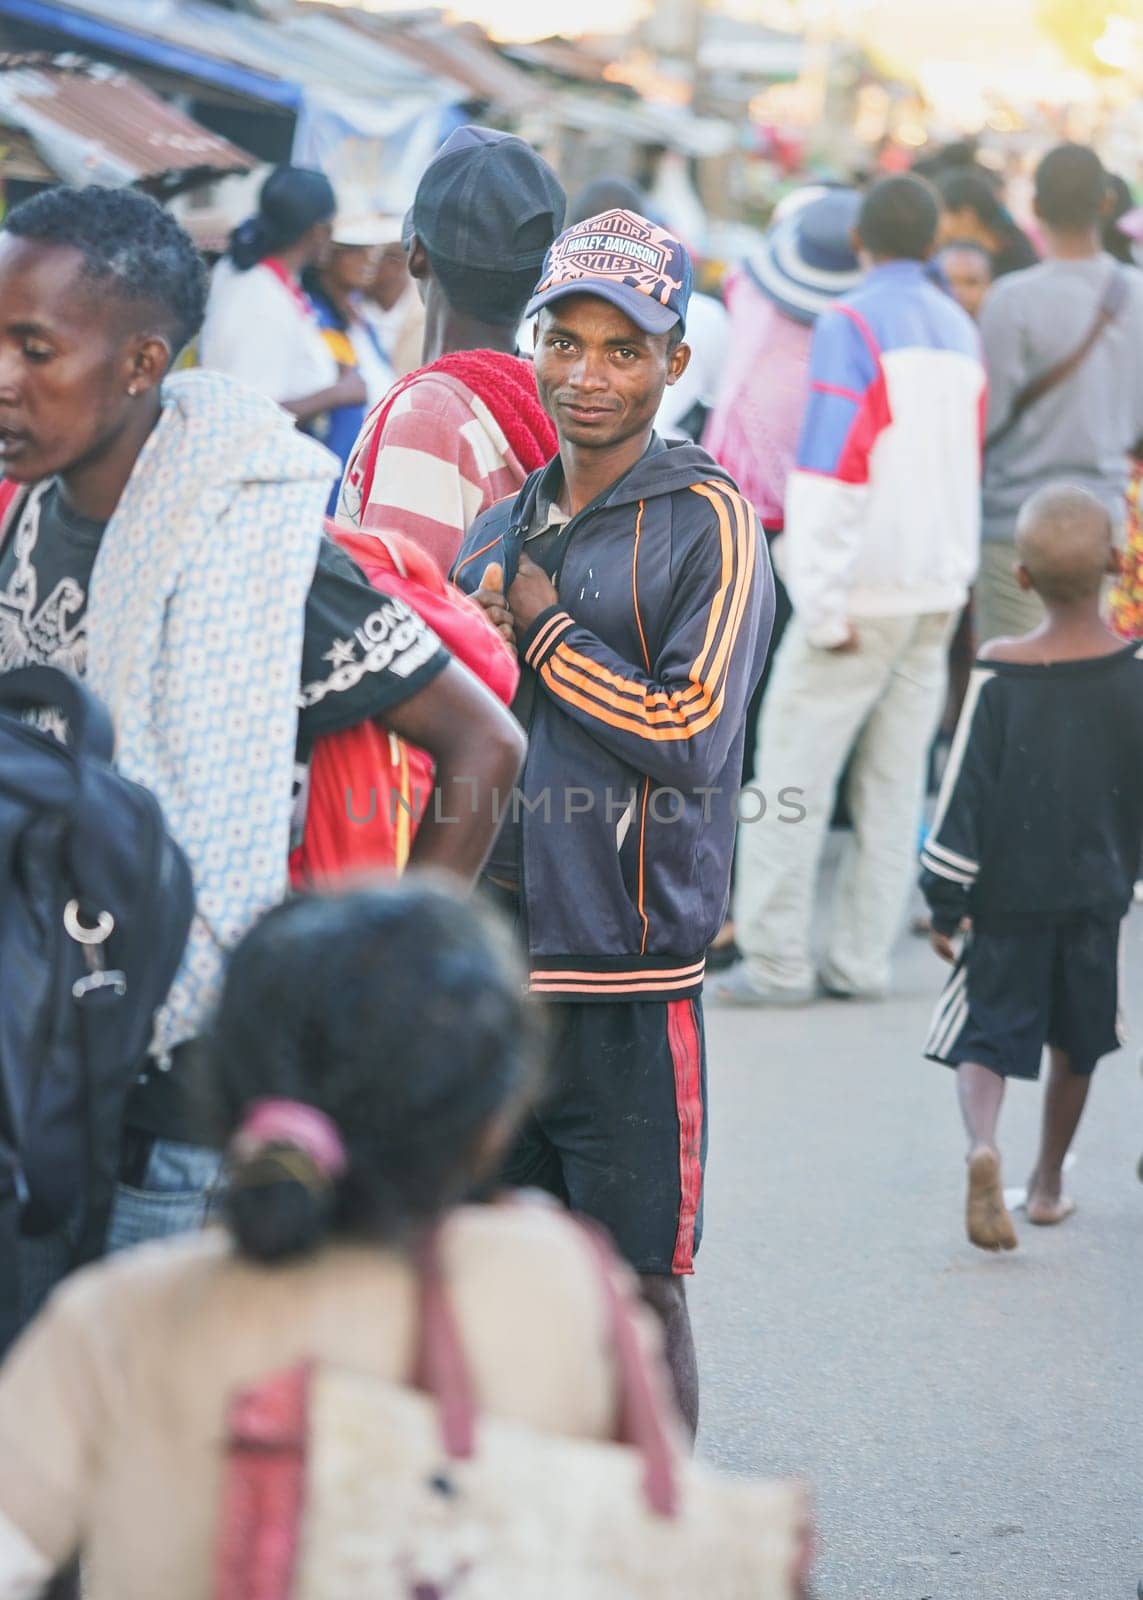 Ranohira, Madagascar - April 29, 2019: Unknown young Malagasy man standing in crowd of other blurred people on busy evening street. Madagascar people are poor but cheerful by Ivanko